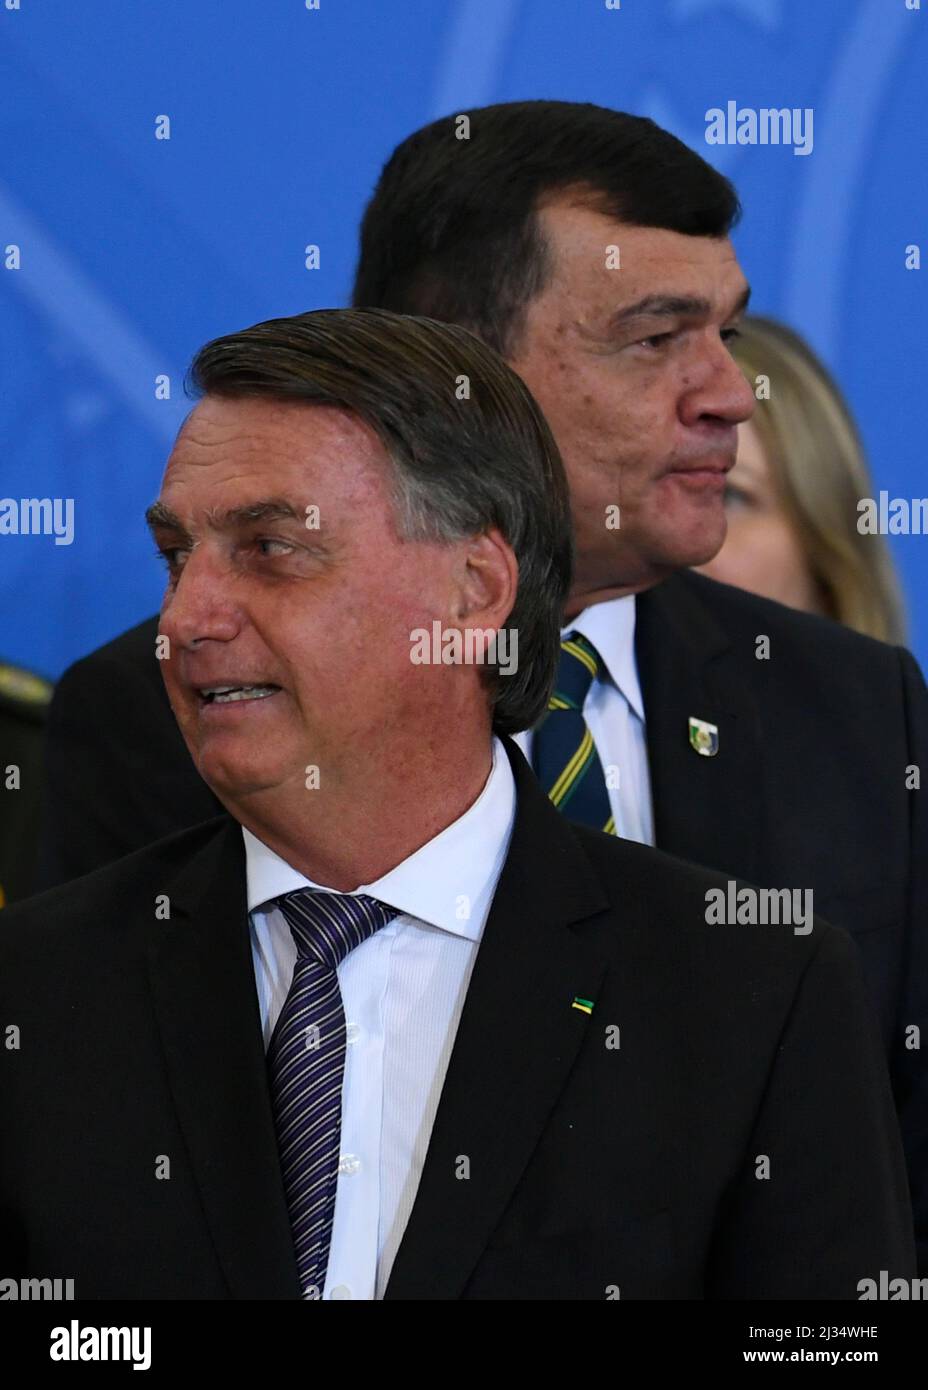 Brasilia, Brazil. 05th Apr, 2022. DF - Brasilia - 04/05/2022 - BRASILIA, CEREMONY TO THE PROMOTED GENERAL OFFICERS - Brasilia, Ceremony to the promoted General Officers - The President of the Republic, Jair Bolsonaro, accompanied by the Minister of Defense, General Paulo Sergio, during the Greeting Ceremony to the General Officers promoted this Thursday, March 5th. Photo: Mateus Bonomi/AGIF Credit: AGIF/Alamy Live News Stock Photo